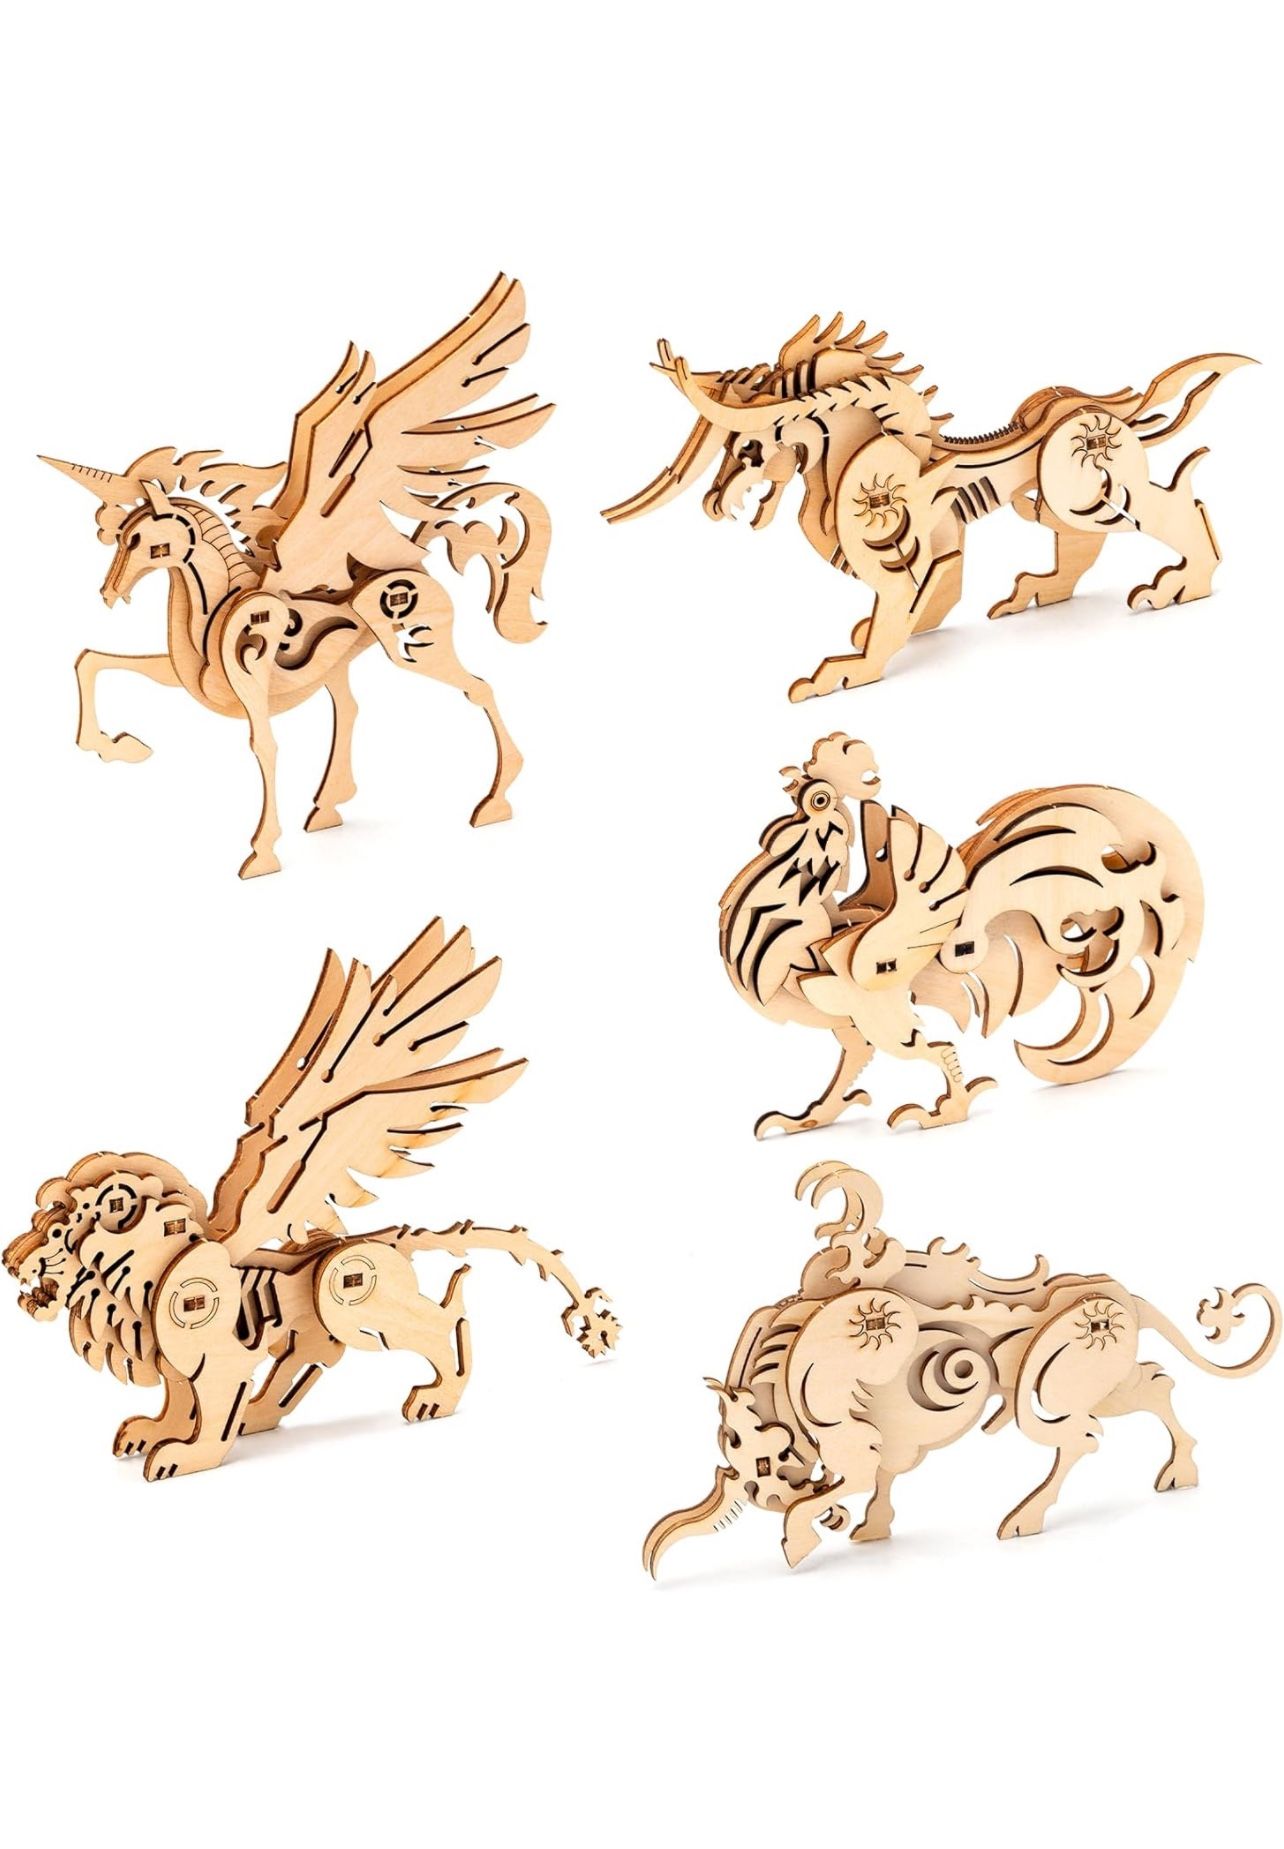 5in1 3D Wooden Puzzle Animal Beast Model Set DIY Building Kits